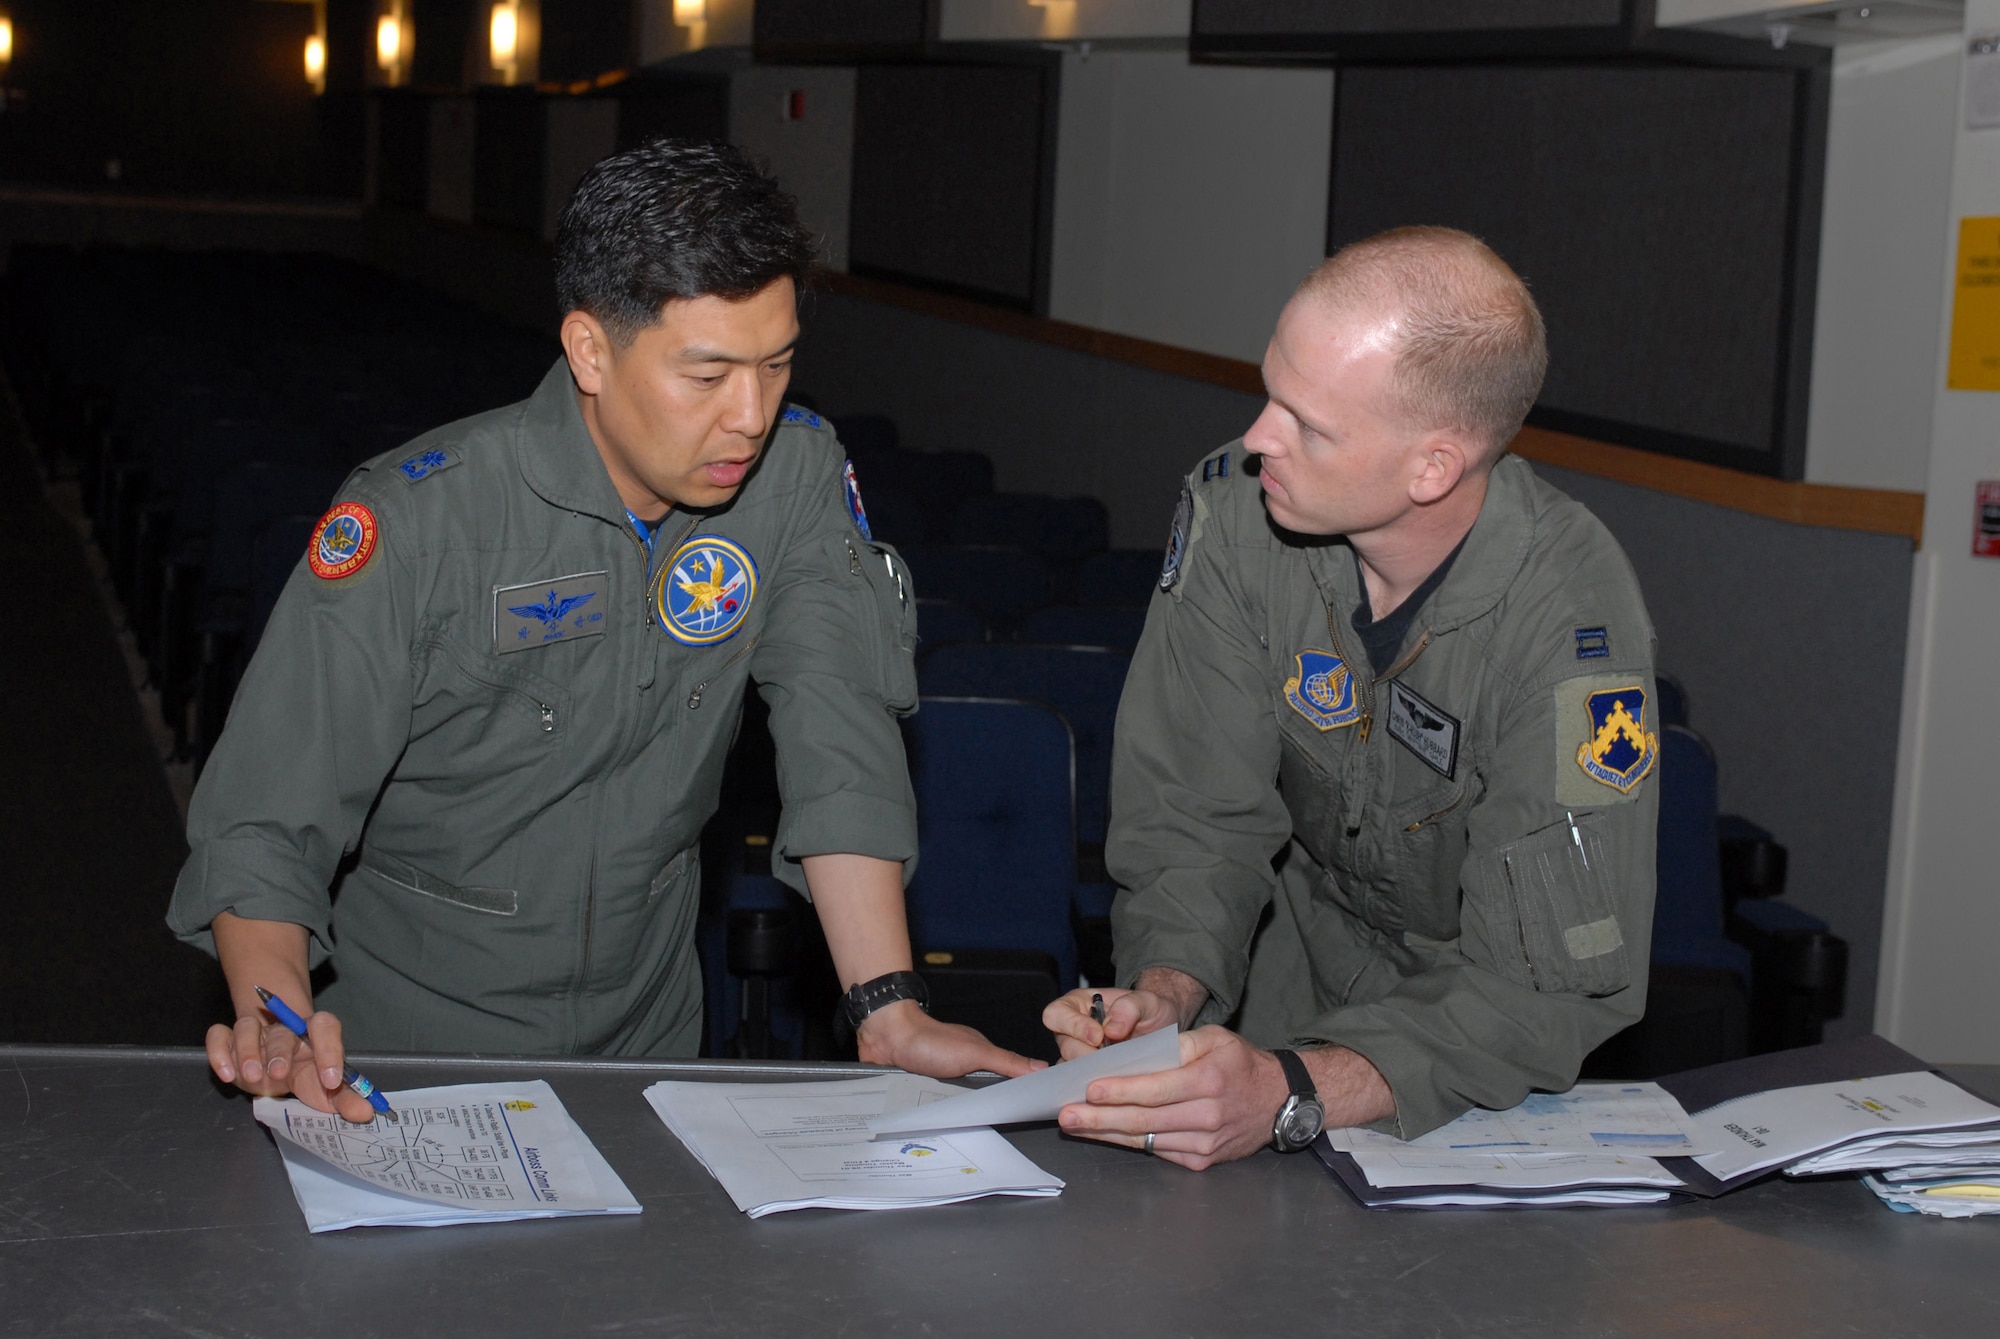 South Korea air force Maj. Sang-Gyoon Park discusses the Exercise Max Thunder itinerary with Capt. Chris Hubbard,  here June 16 at Kunsan Air Base, South Korea. Max Thunder is a bi-lateral training exercise between U.S. and Korean Airmen used to strengthen joint operations and sharpen warfighting skills. Major Park is a pilot with the 11th Fighter Wing and Captain Hubbard is an 8th Operations Group pilot. (U.S. Air Force photo/Senior Airman Angela Ruiz) 